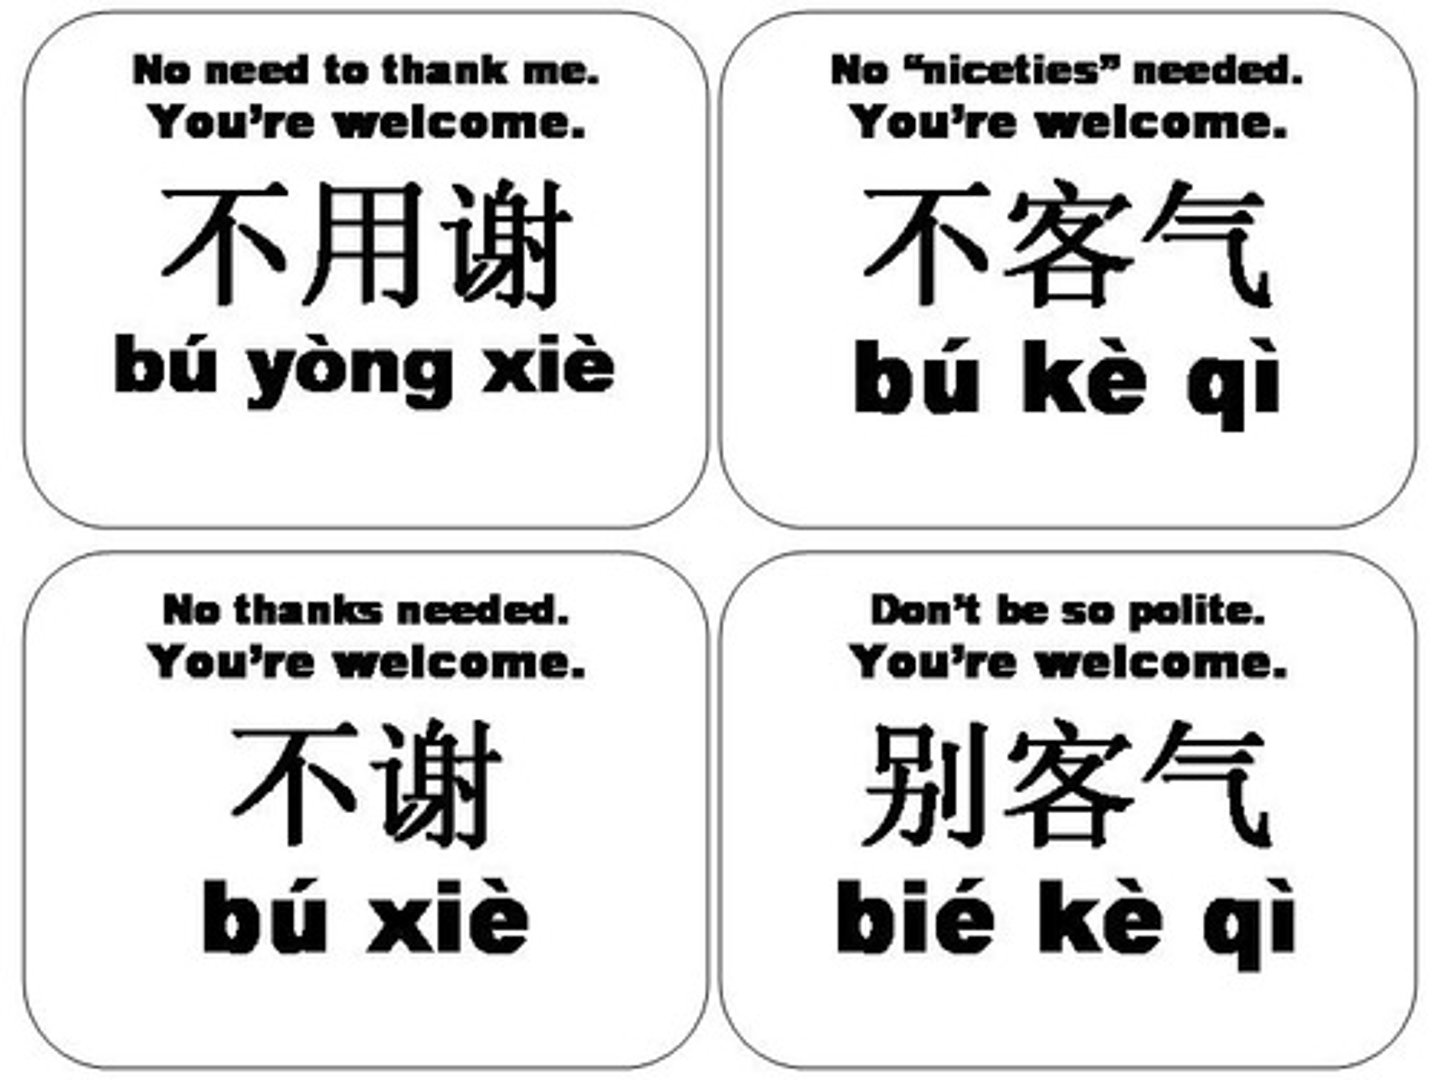 <p>you are welcome (búkèqi)</p>